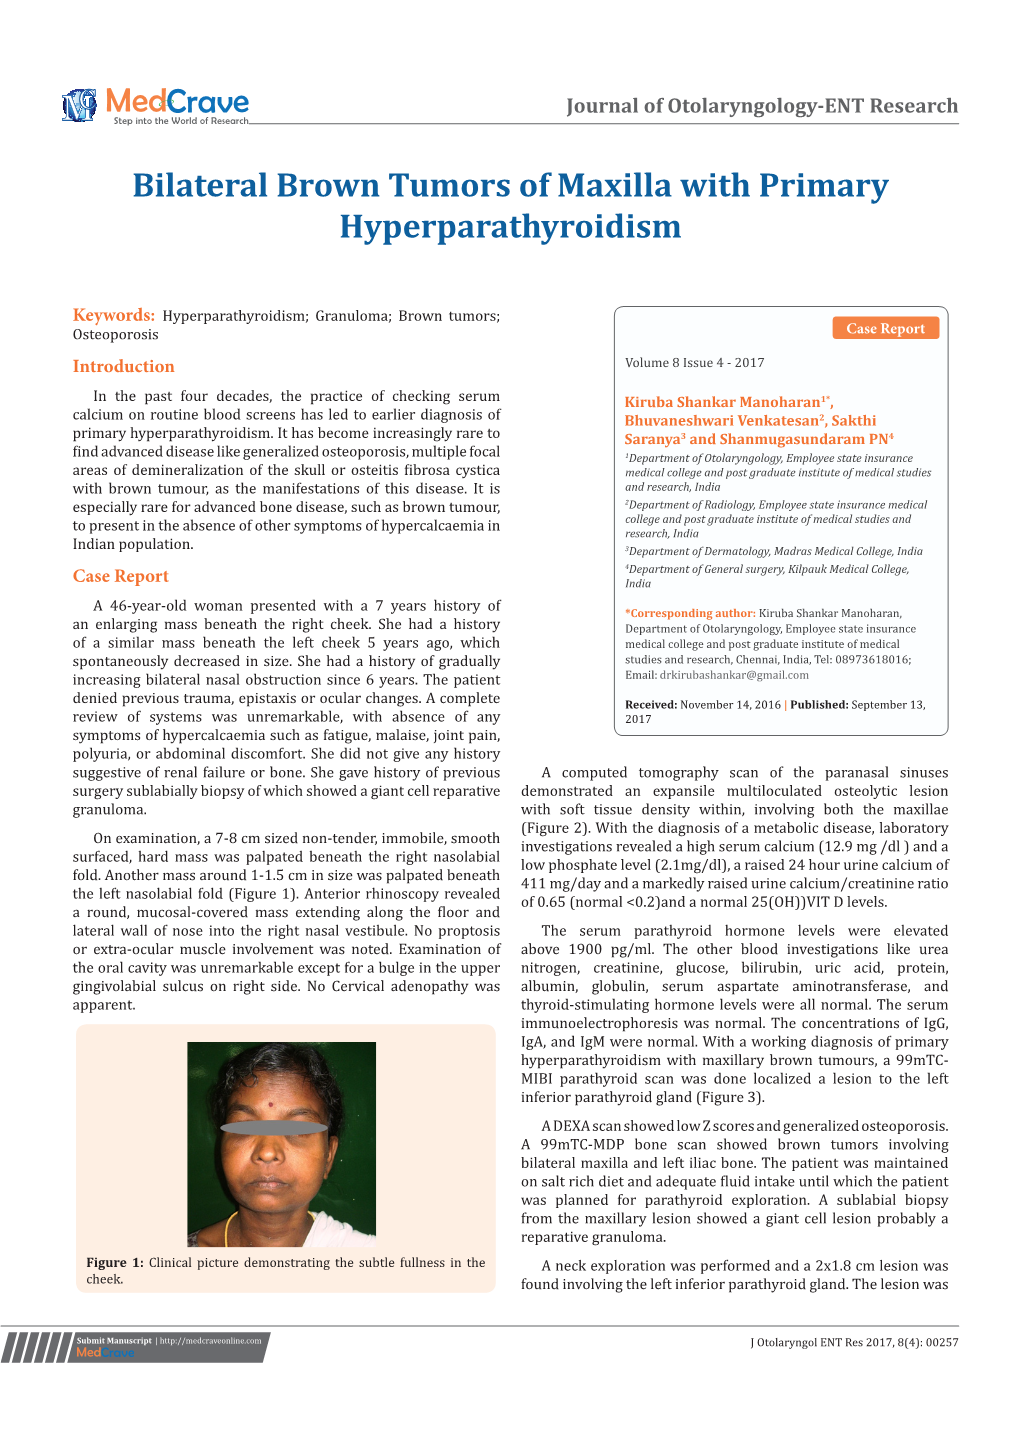 Bilateral Brown Tumors of Maxilla with Primary Hyperparathyroidism